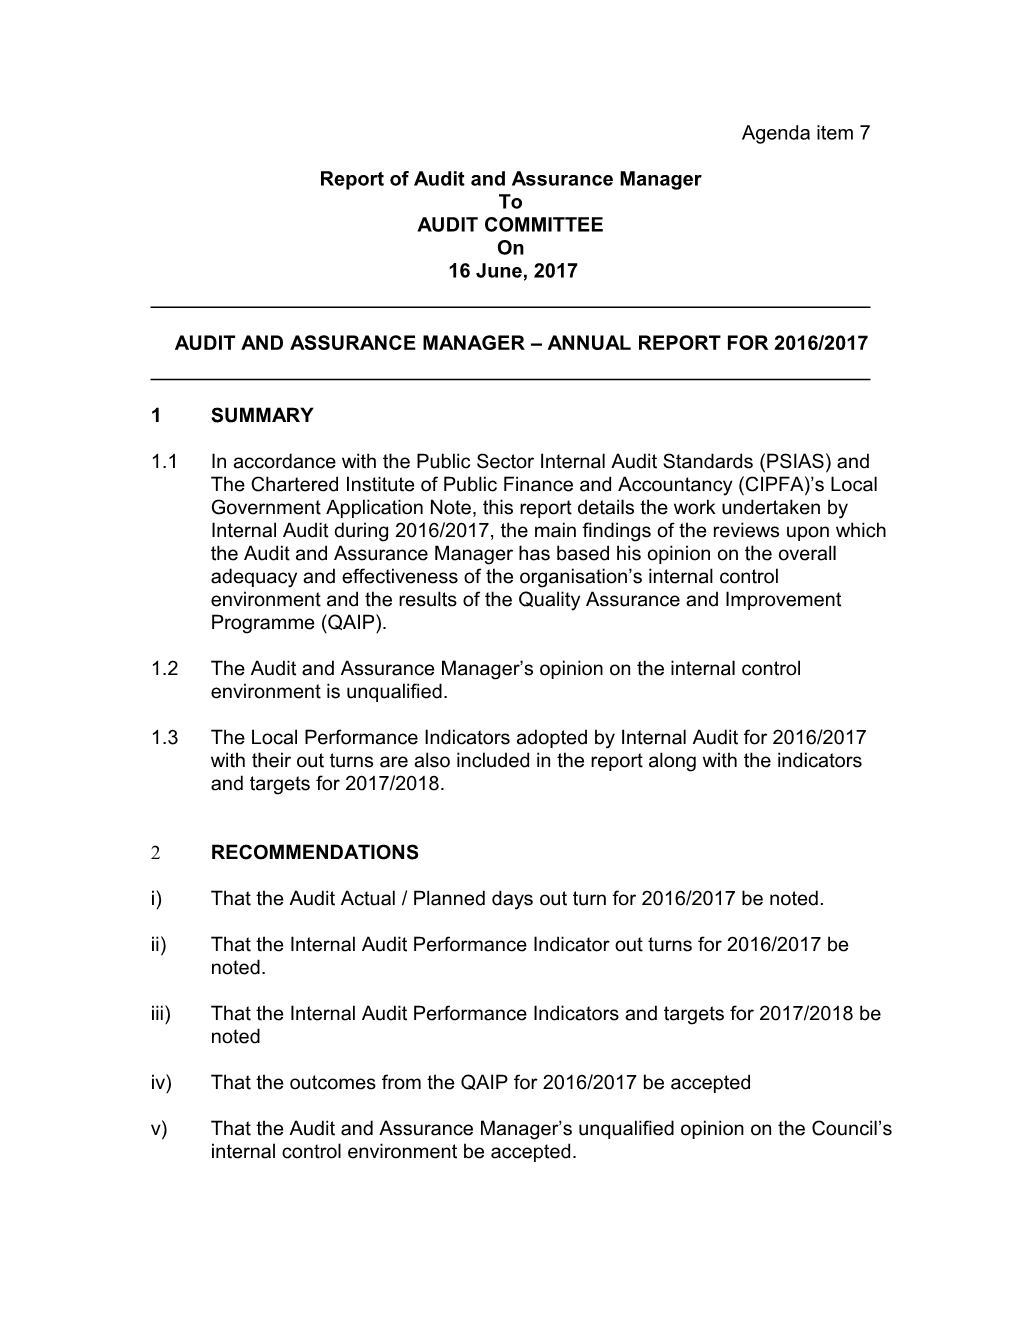 Report of Audit and Assurance Manager s1